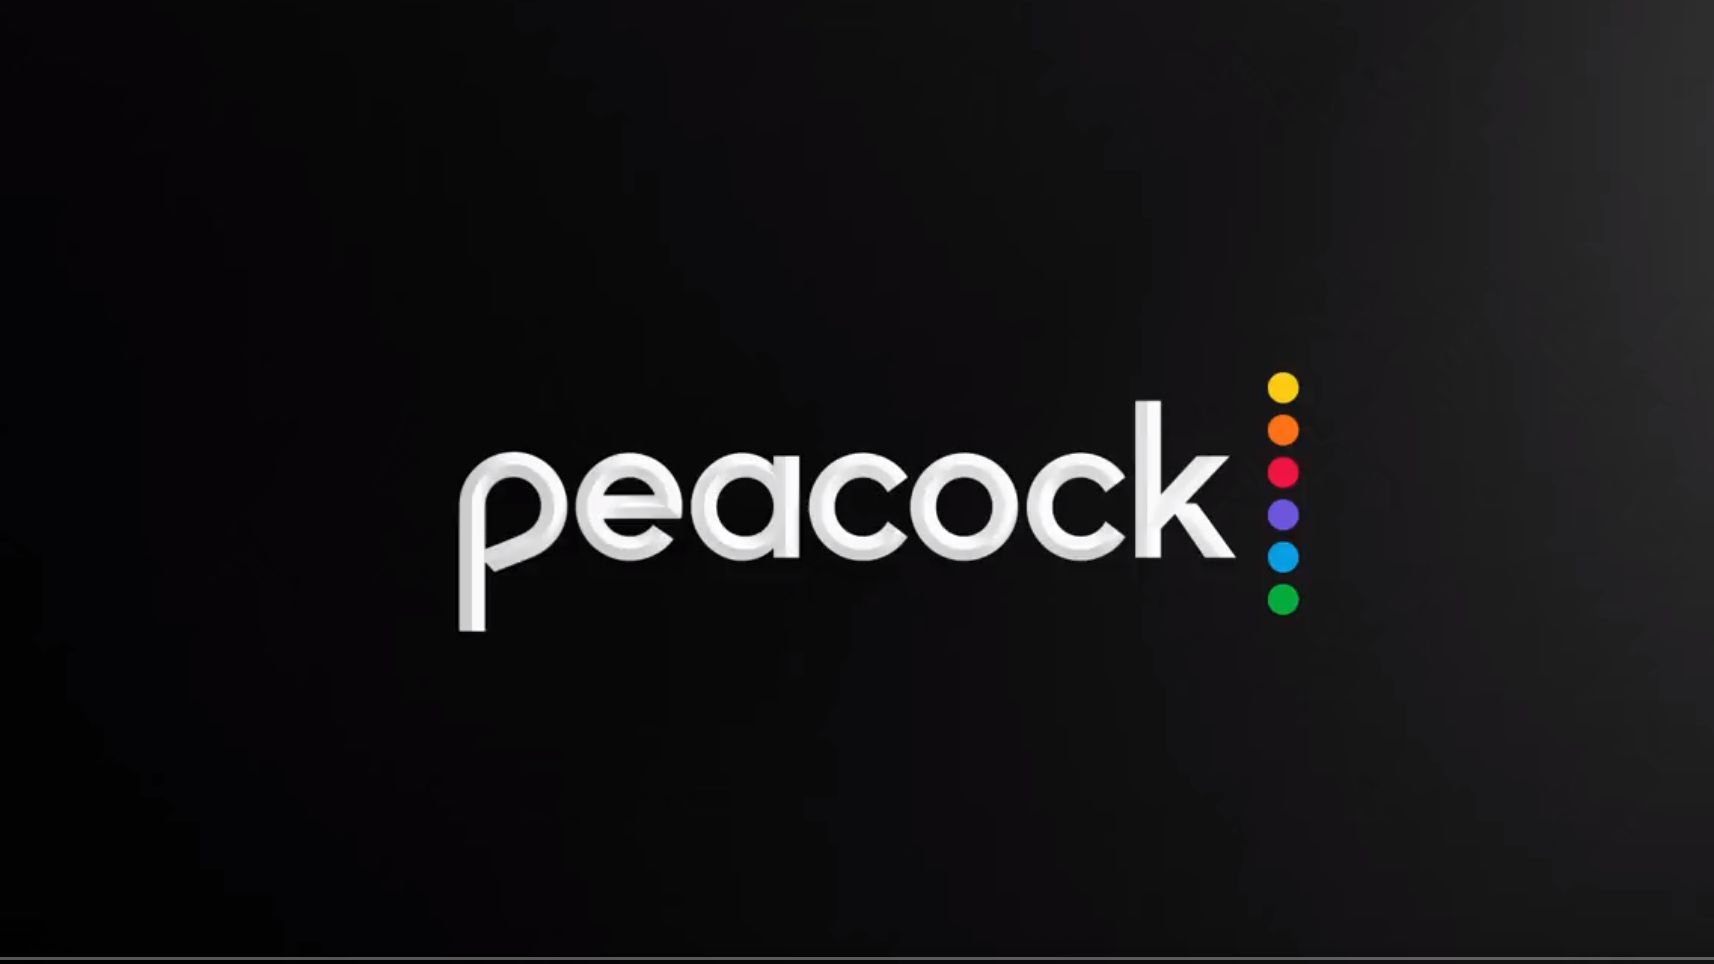 Peacock Cyber Monday deal Get Peacock for just 1 per month for a full